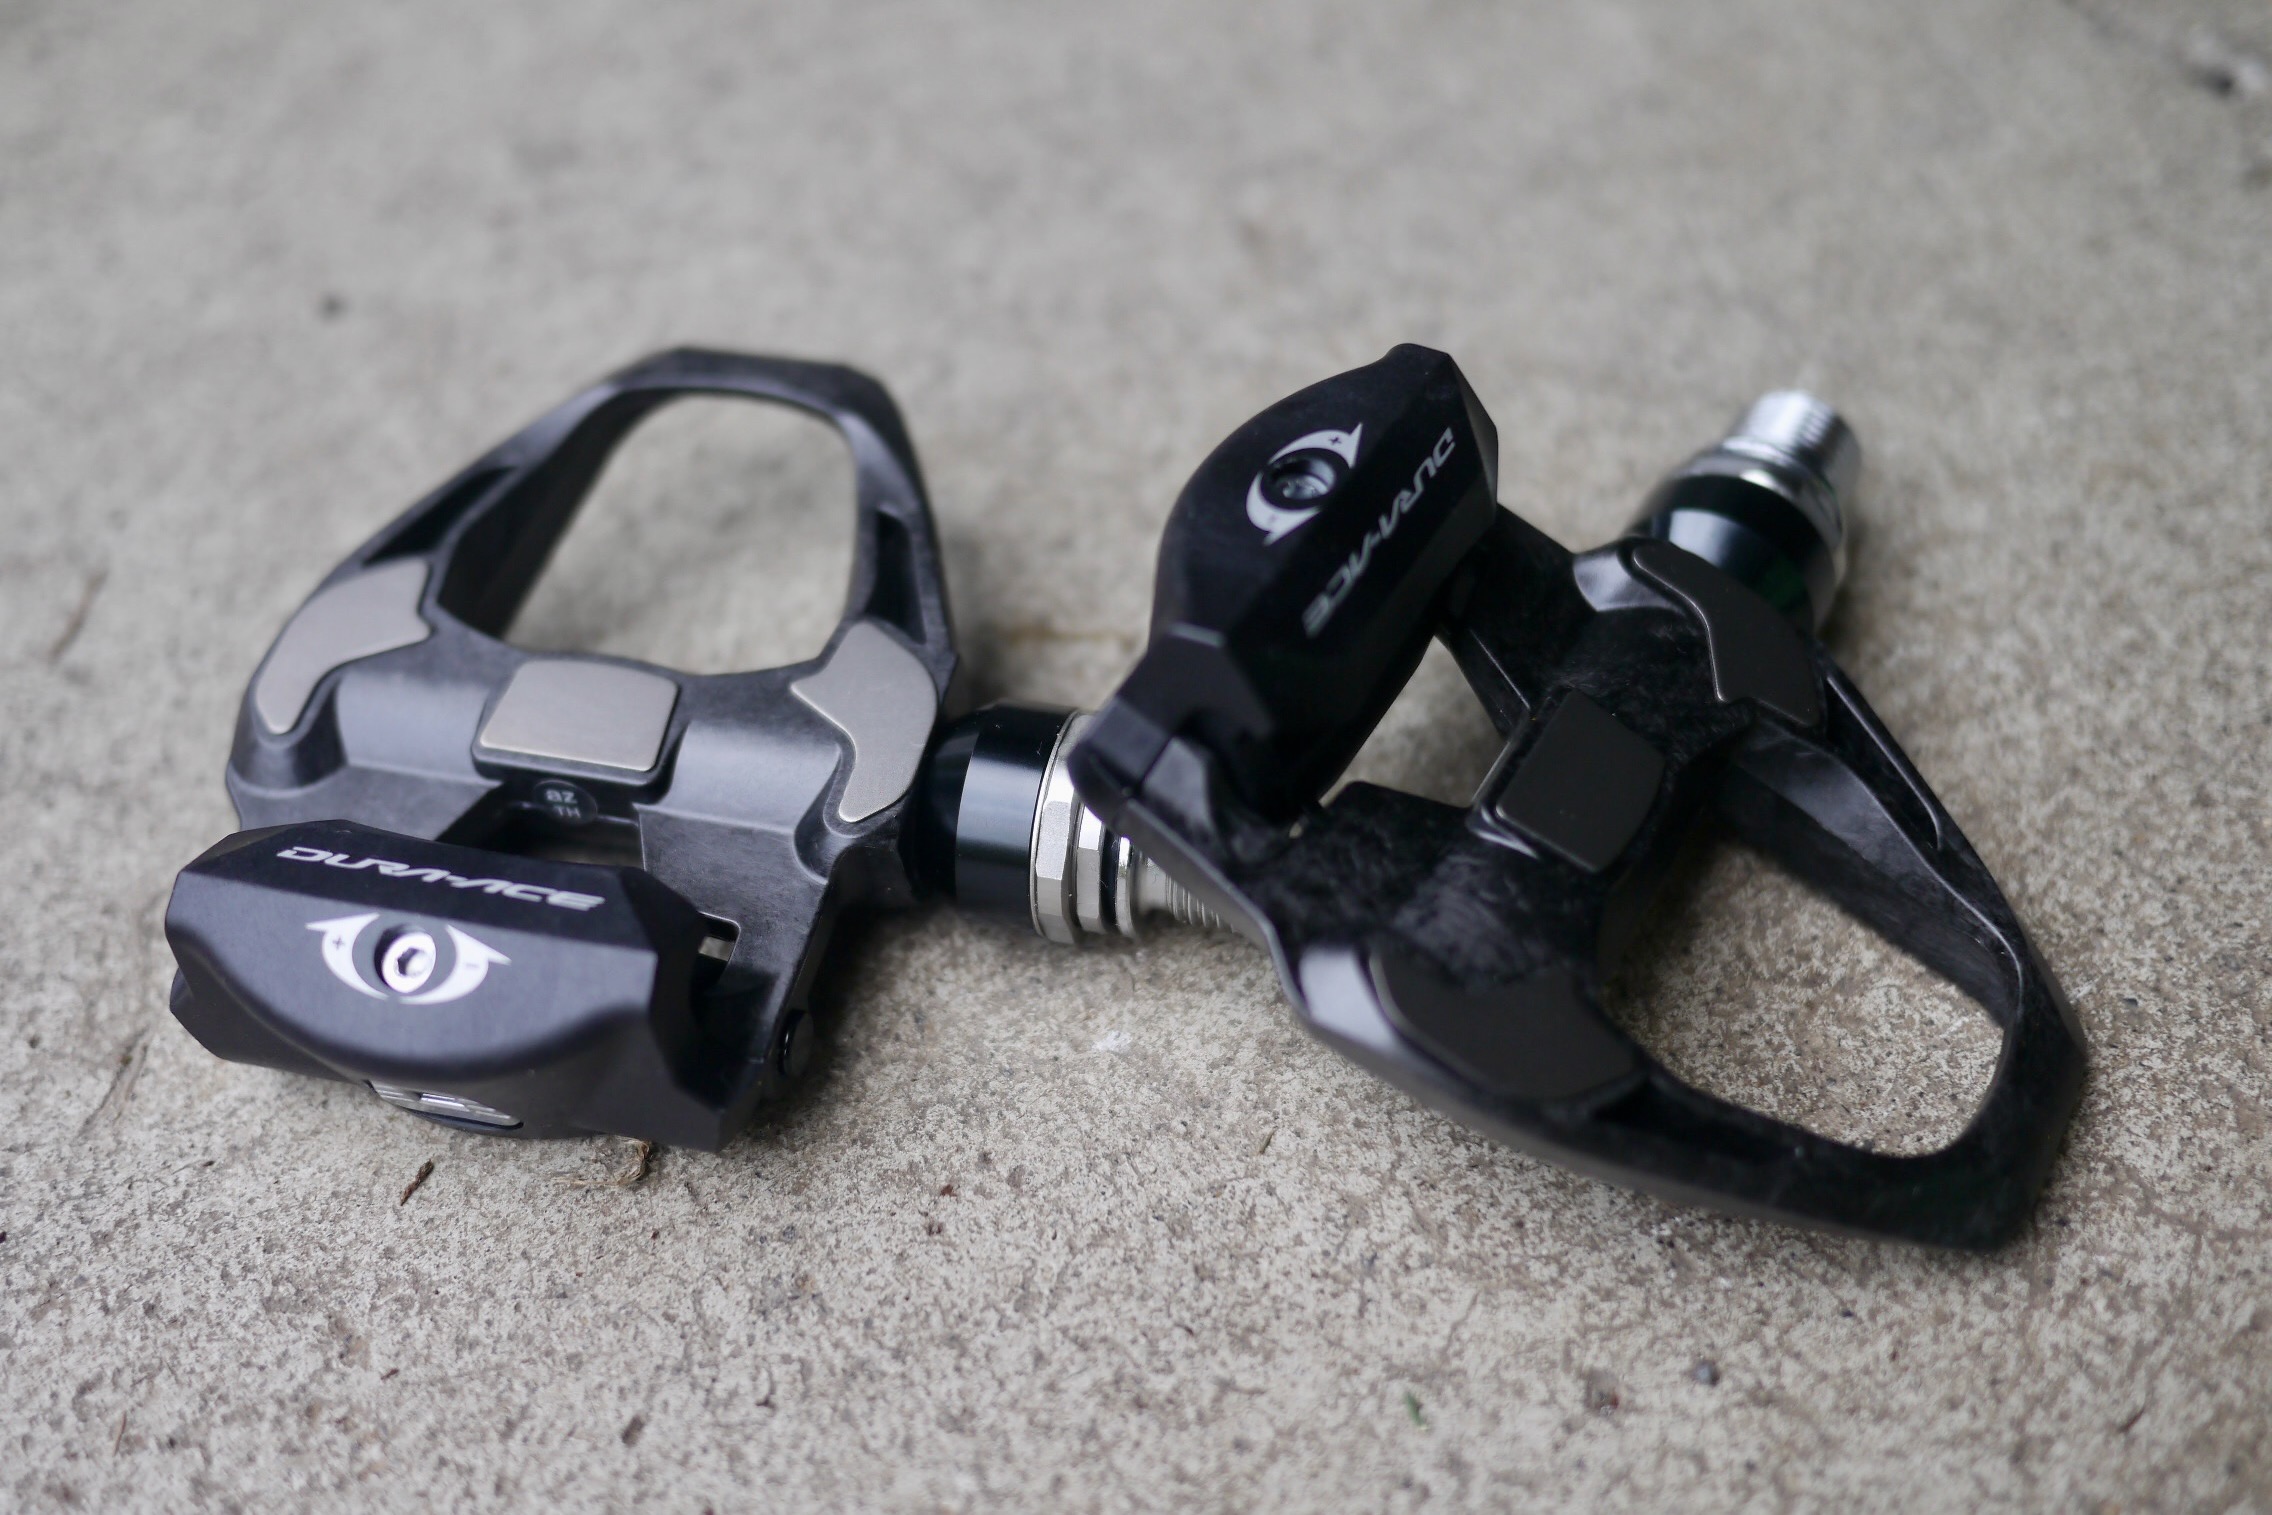 Shimano Dura-Ace pedals detail shot